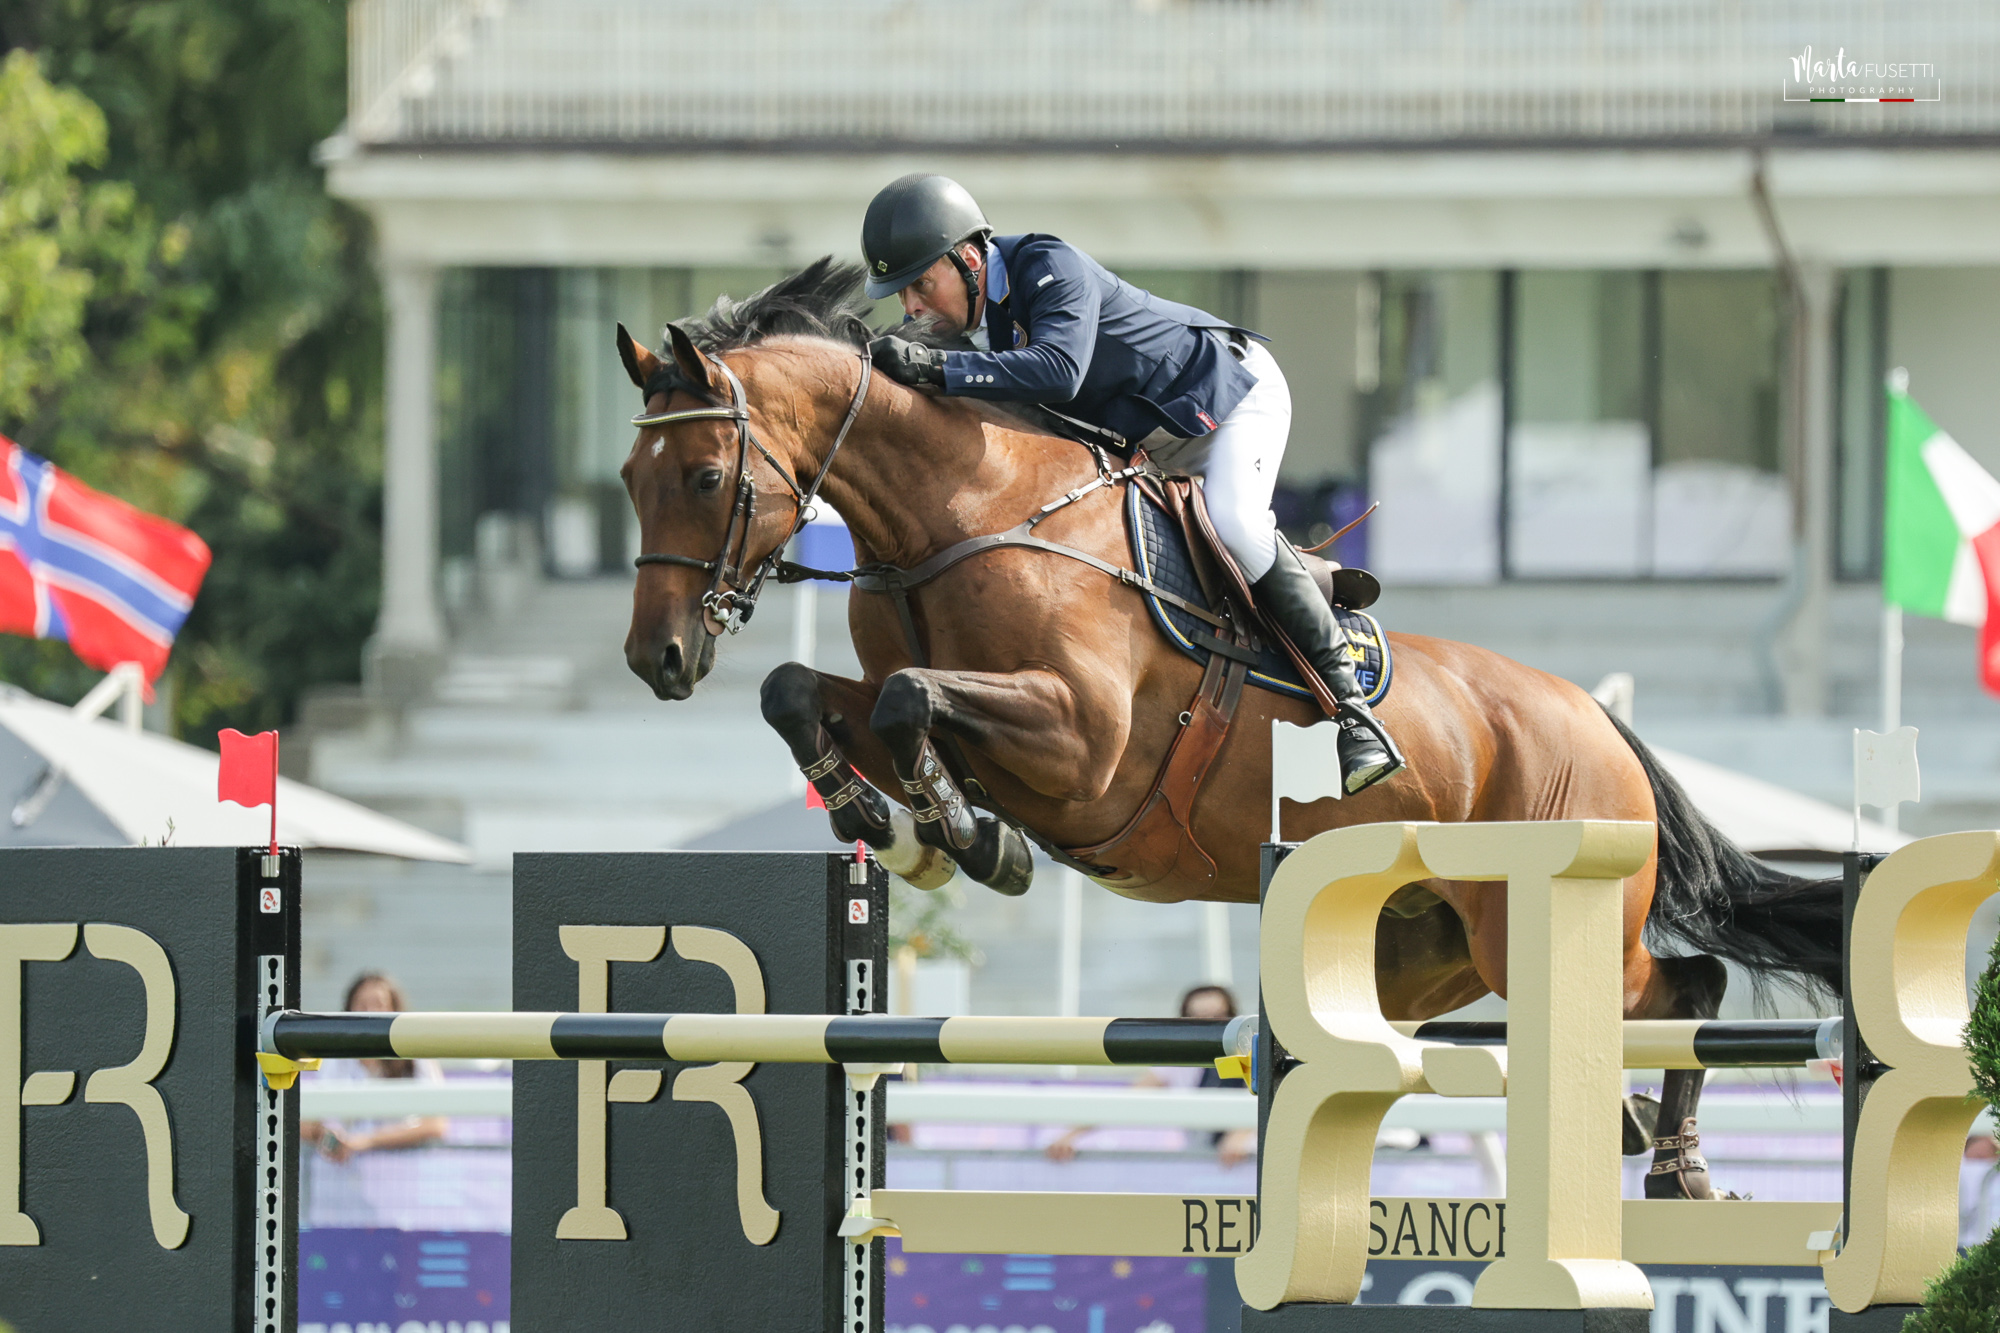 Jens Fredricson and Markan Cosmopolit for the European Champion title